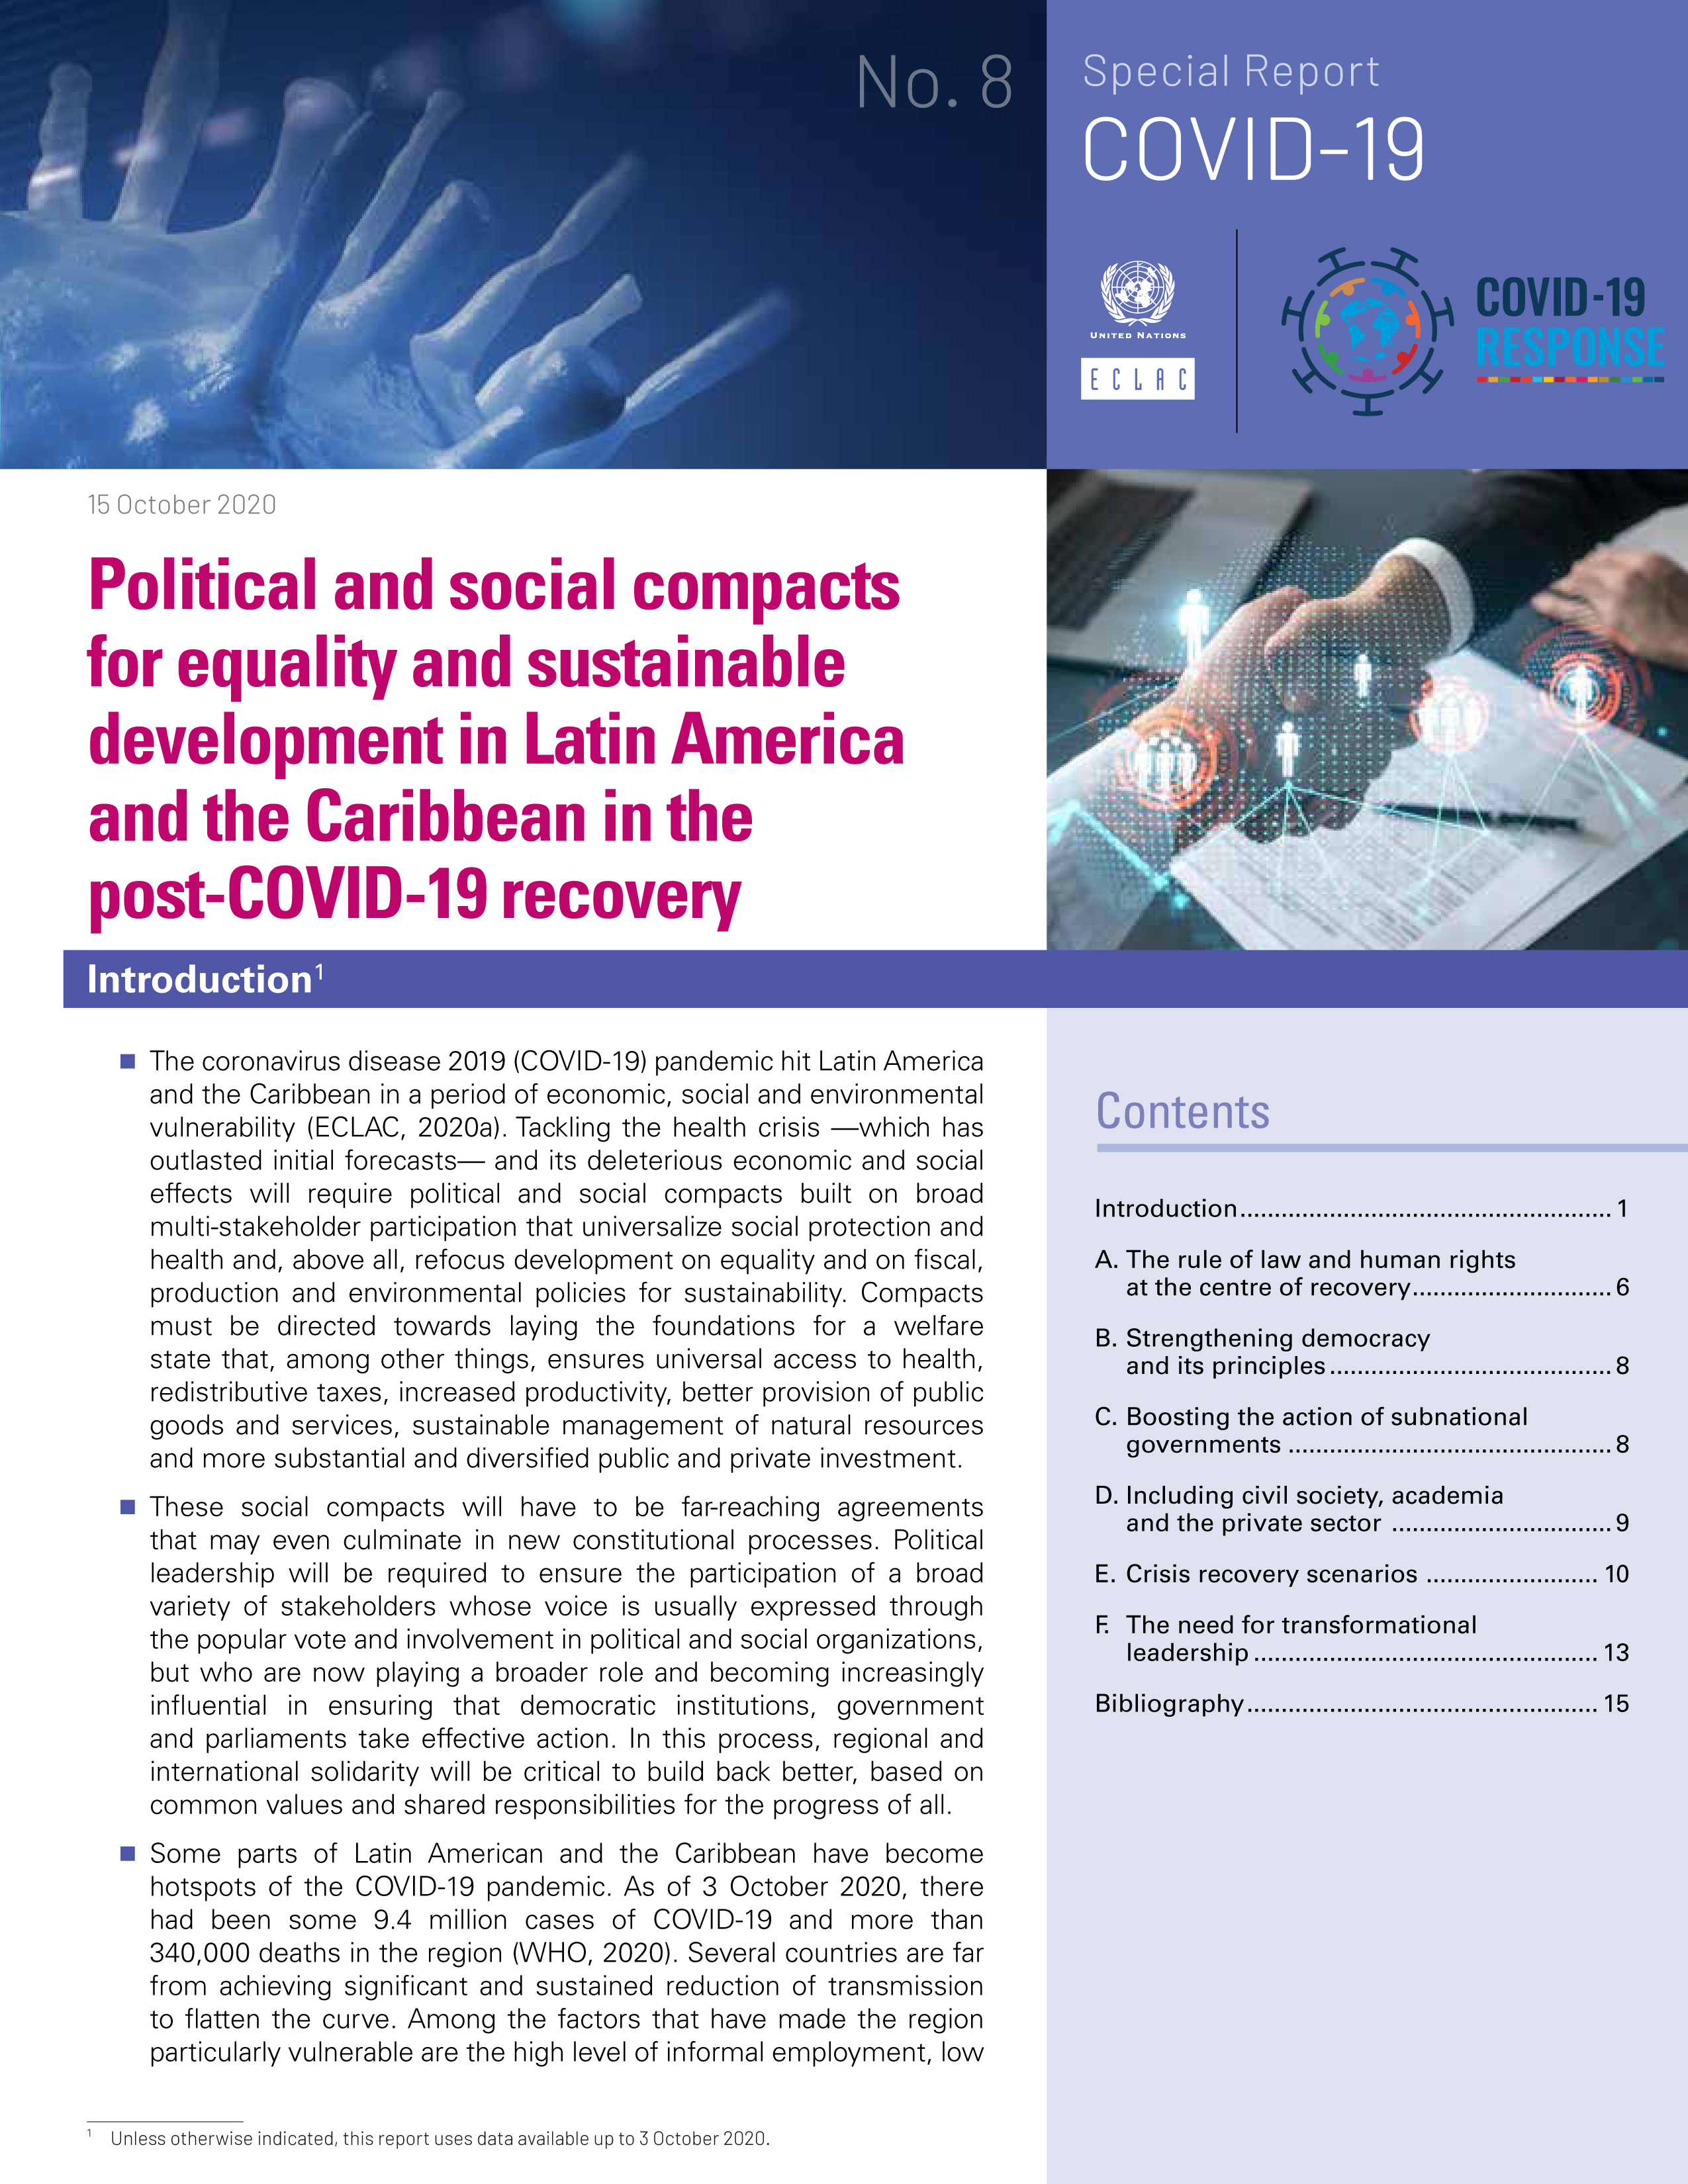 image of Political and Social Compacts for Equality and Sustainable Development in Latin America and the Caribbean in the Post-COVID-19 Recovery